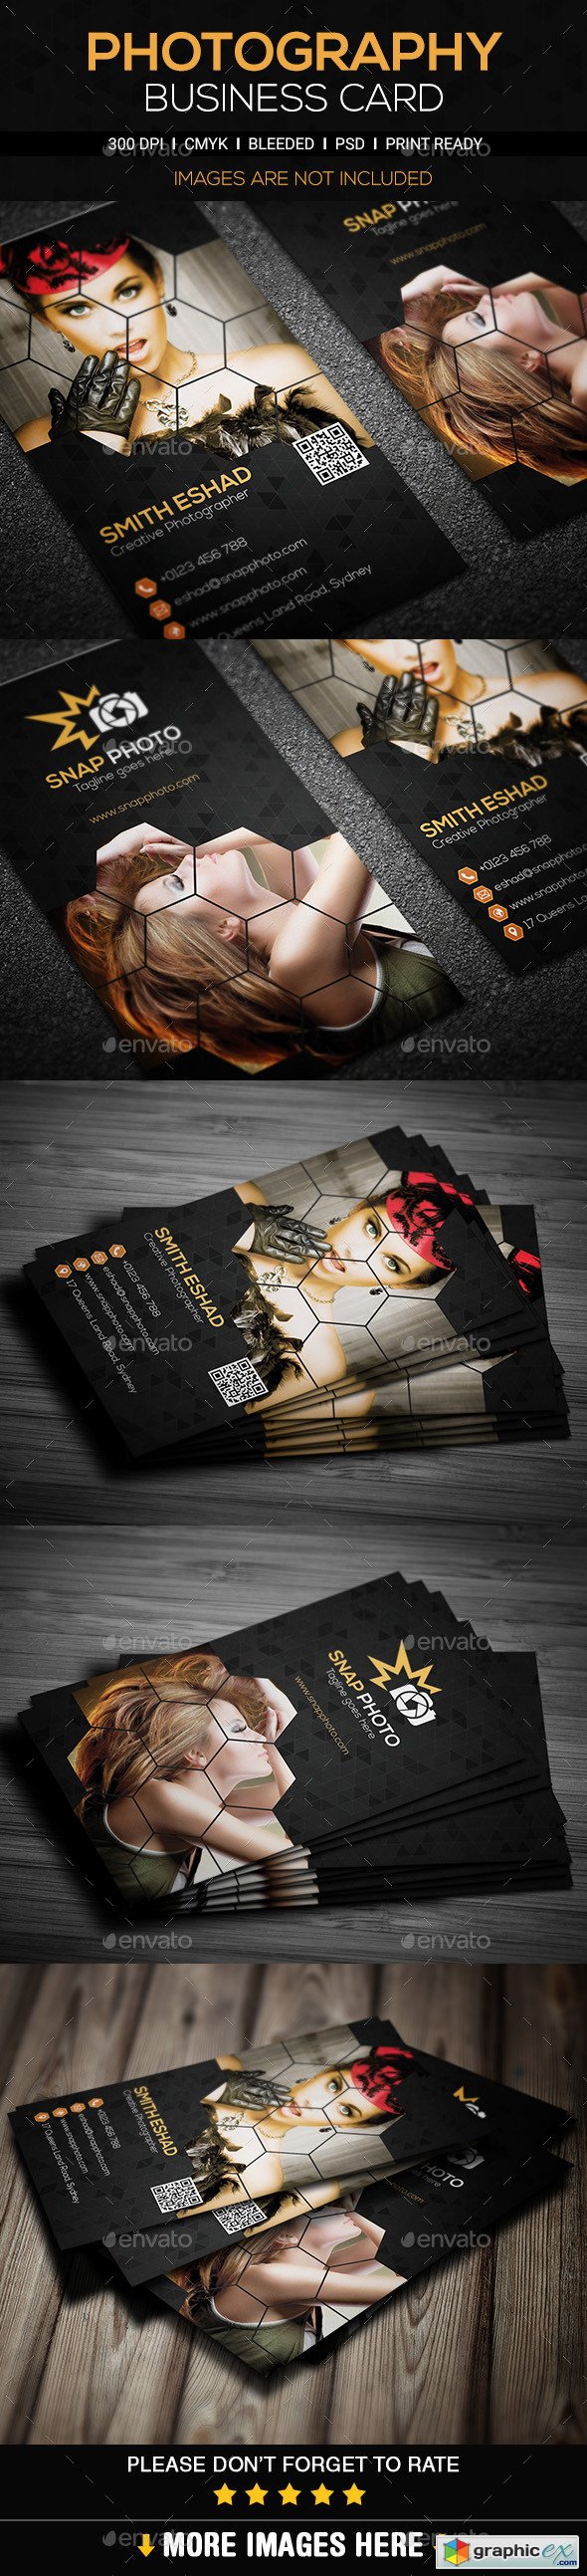 Photography Business Card 11293992